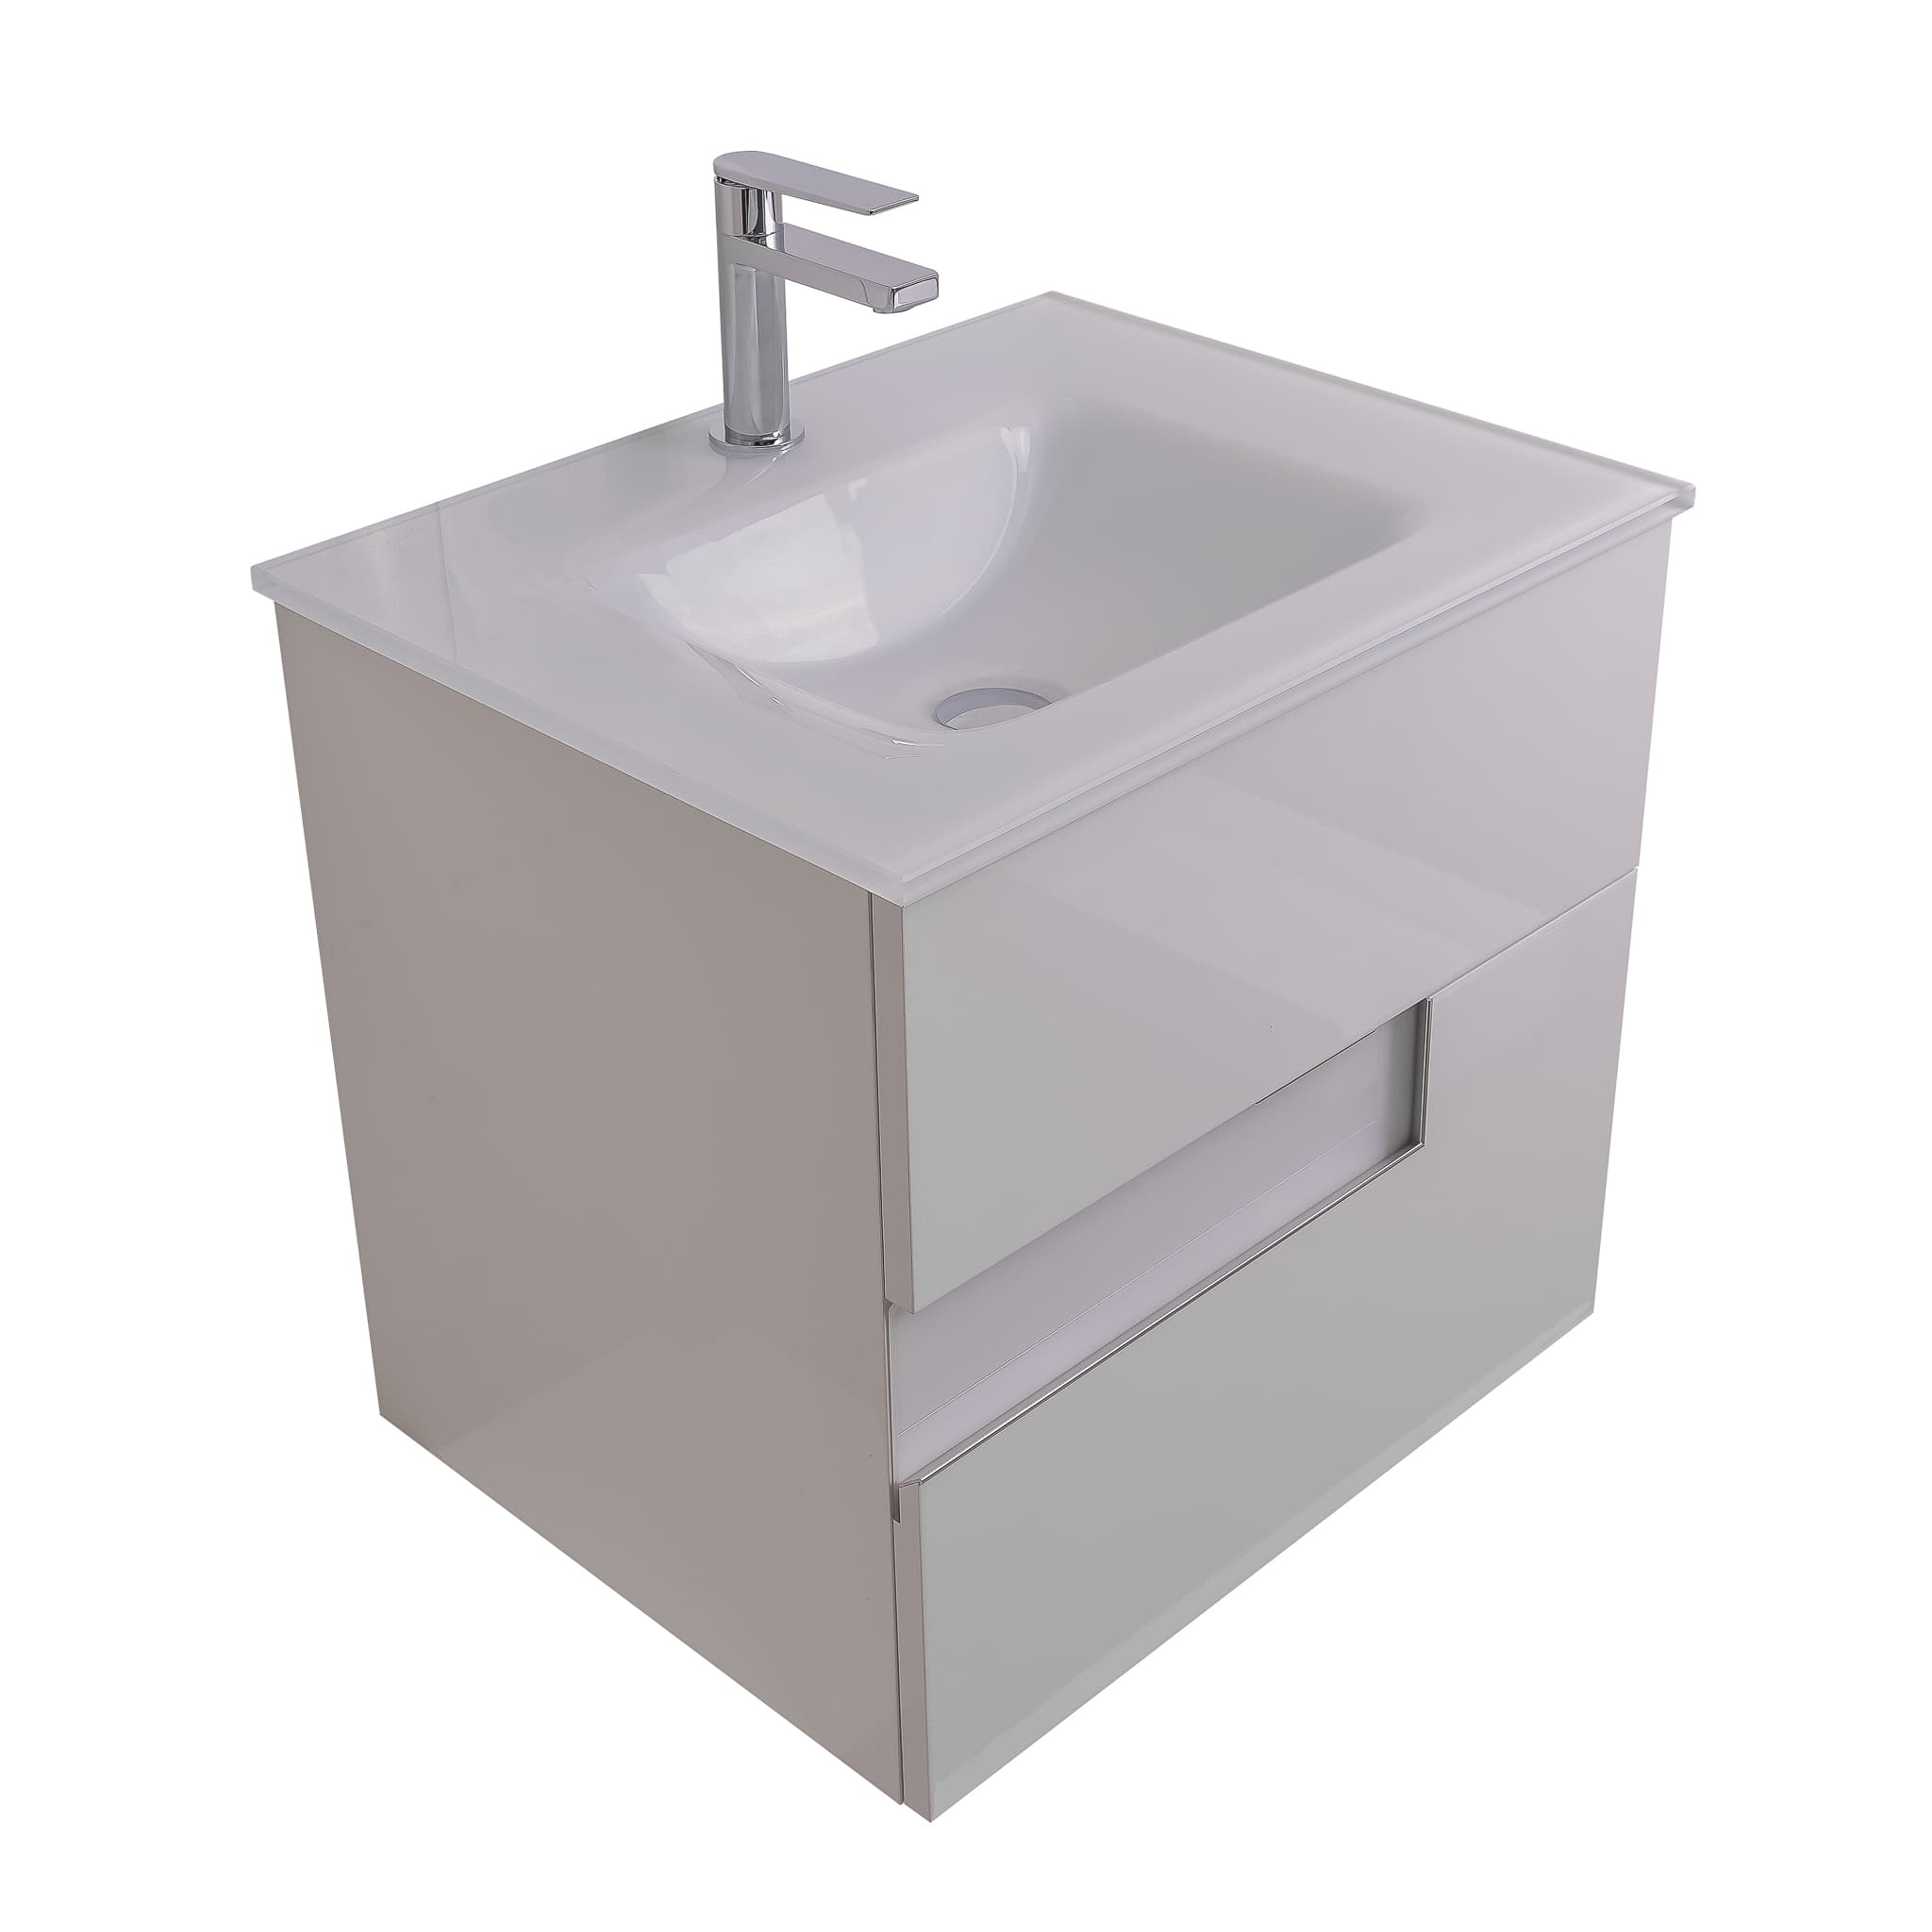 Vision 23.5 White High Gloss Cabinet, White Tempered Glass Sink, Wall Mounted Modern Vanity Set